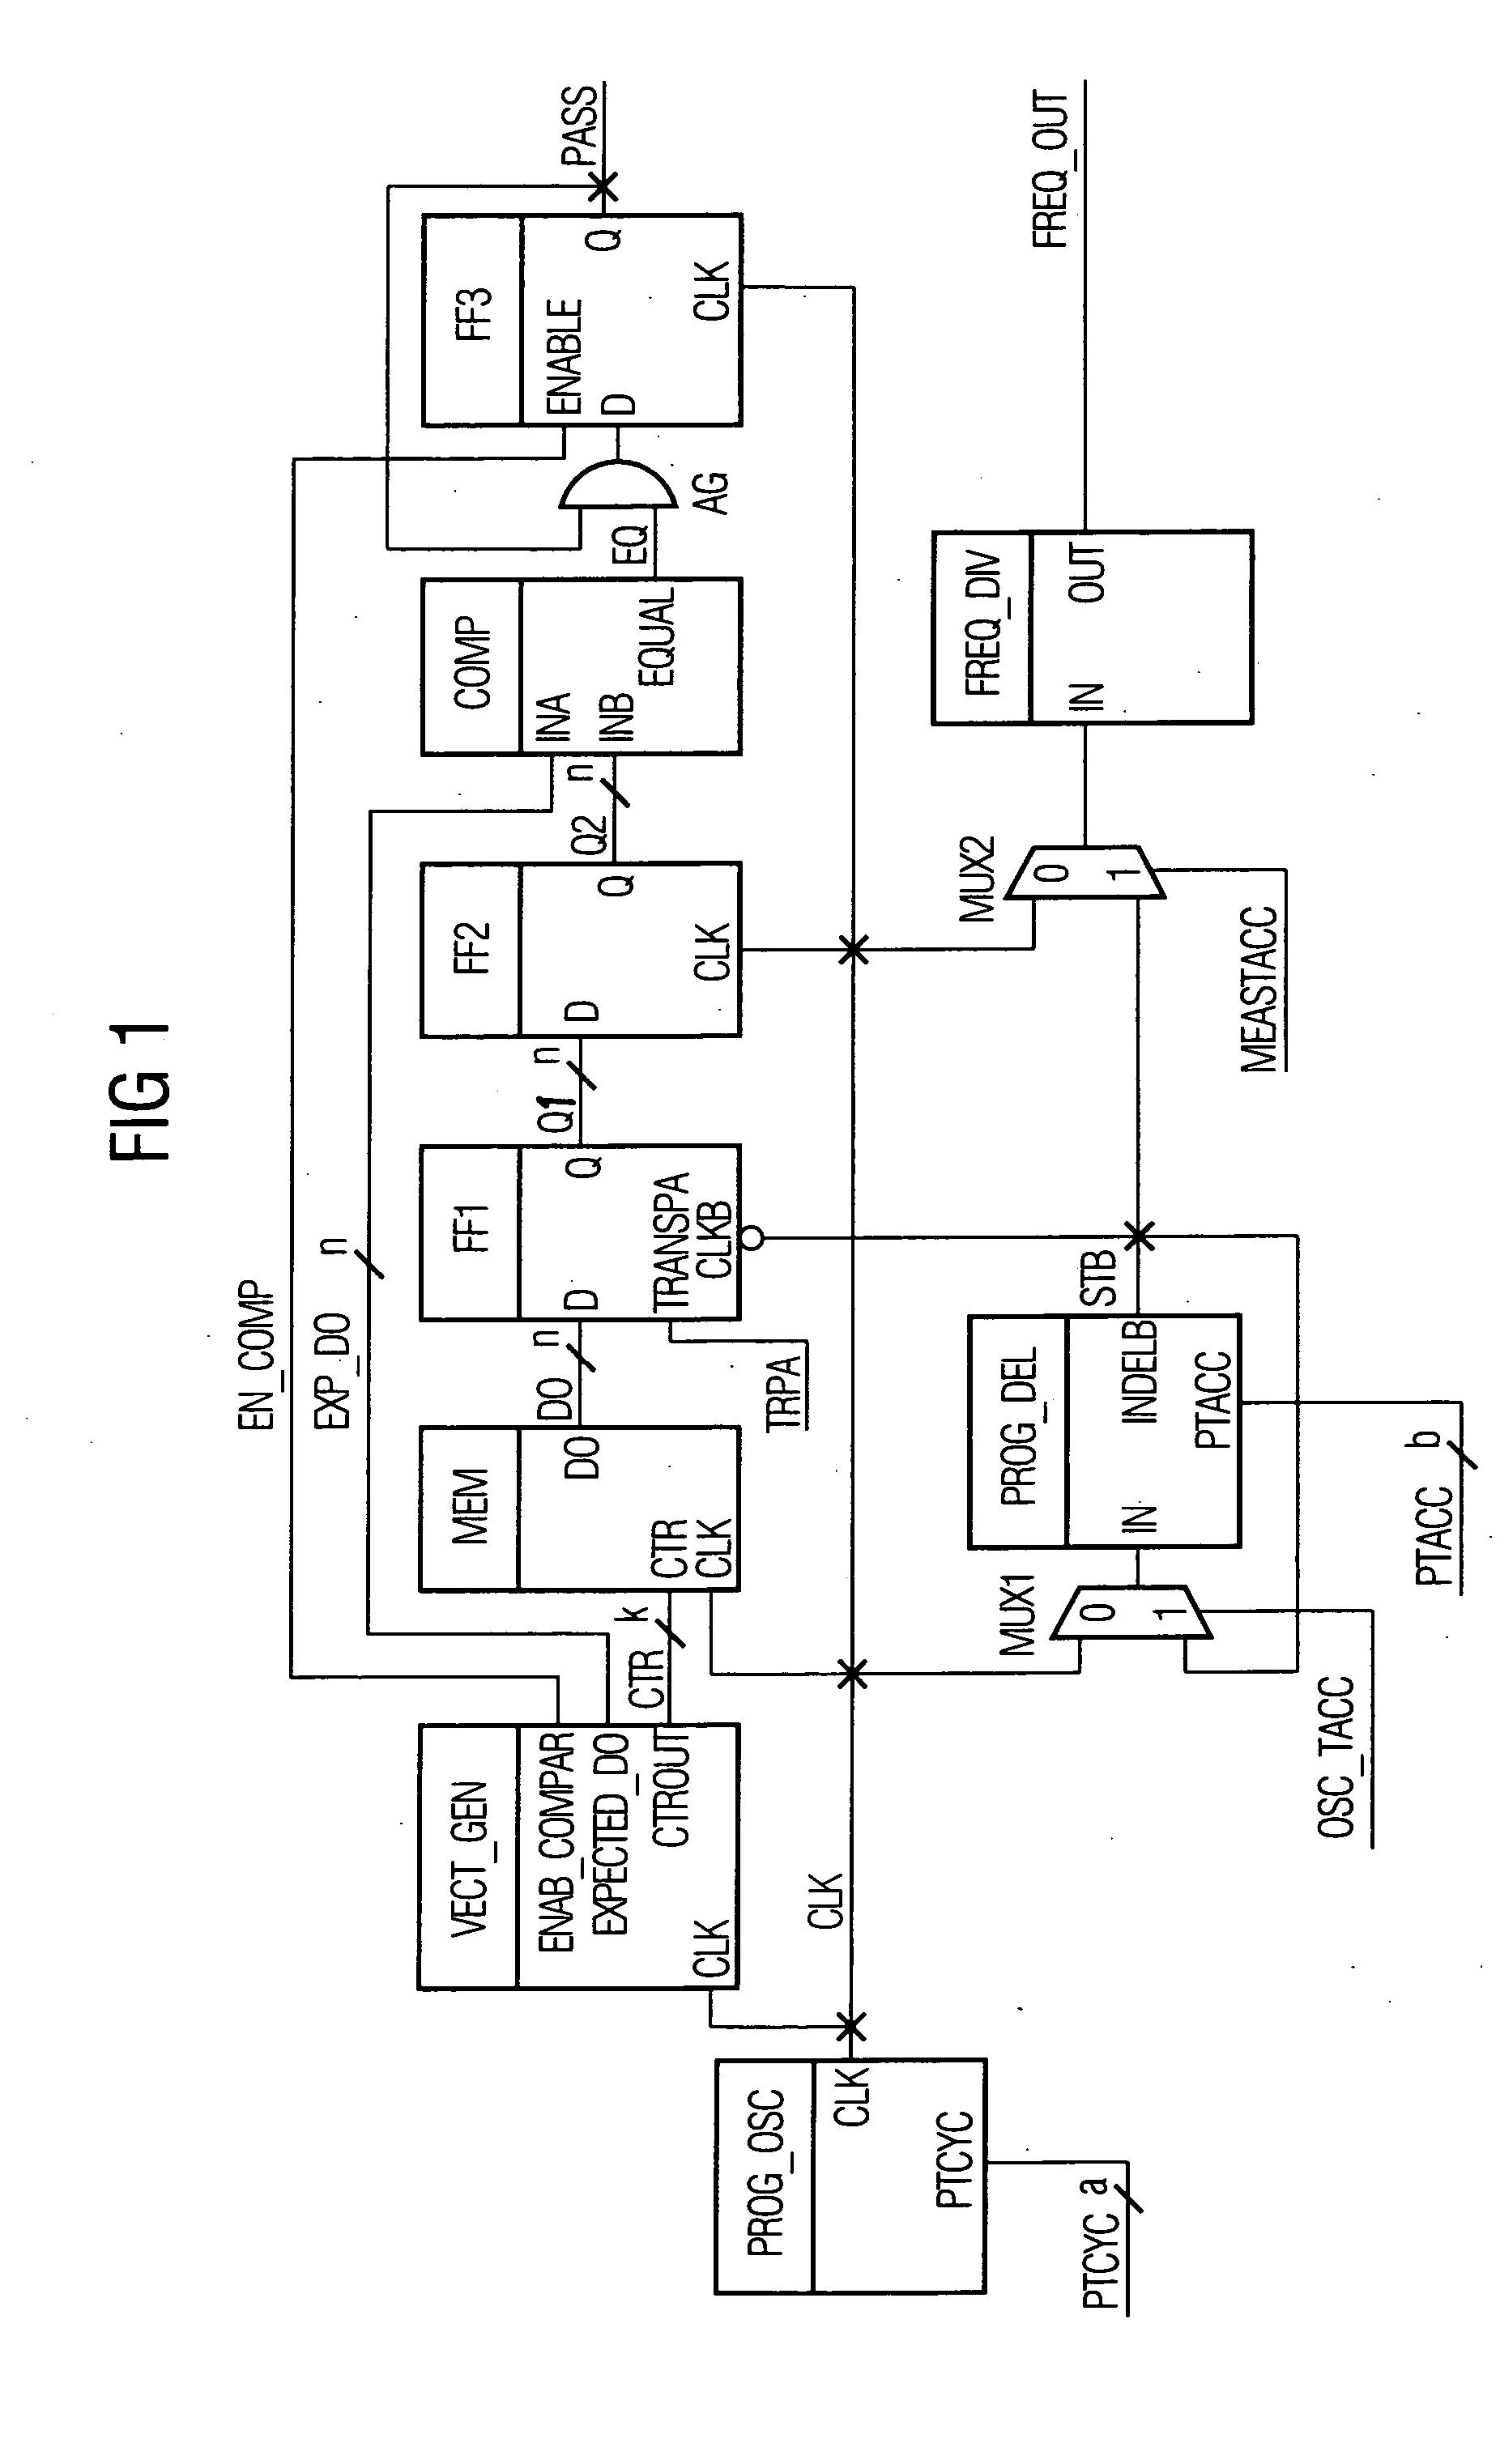 Apparatus for determining the access time and/or the minimally allowable cycle time of a memory